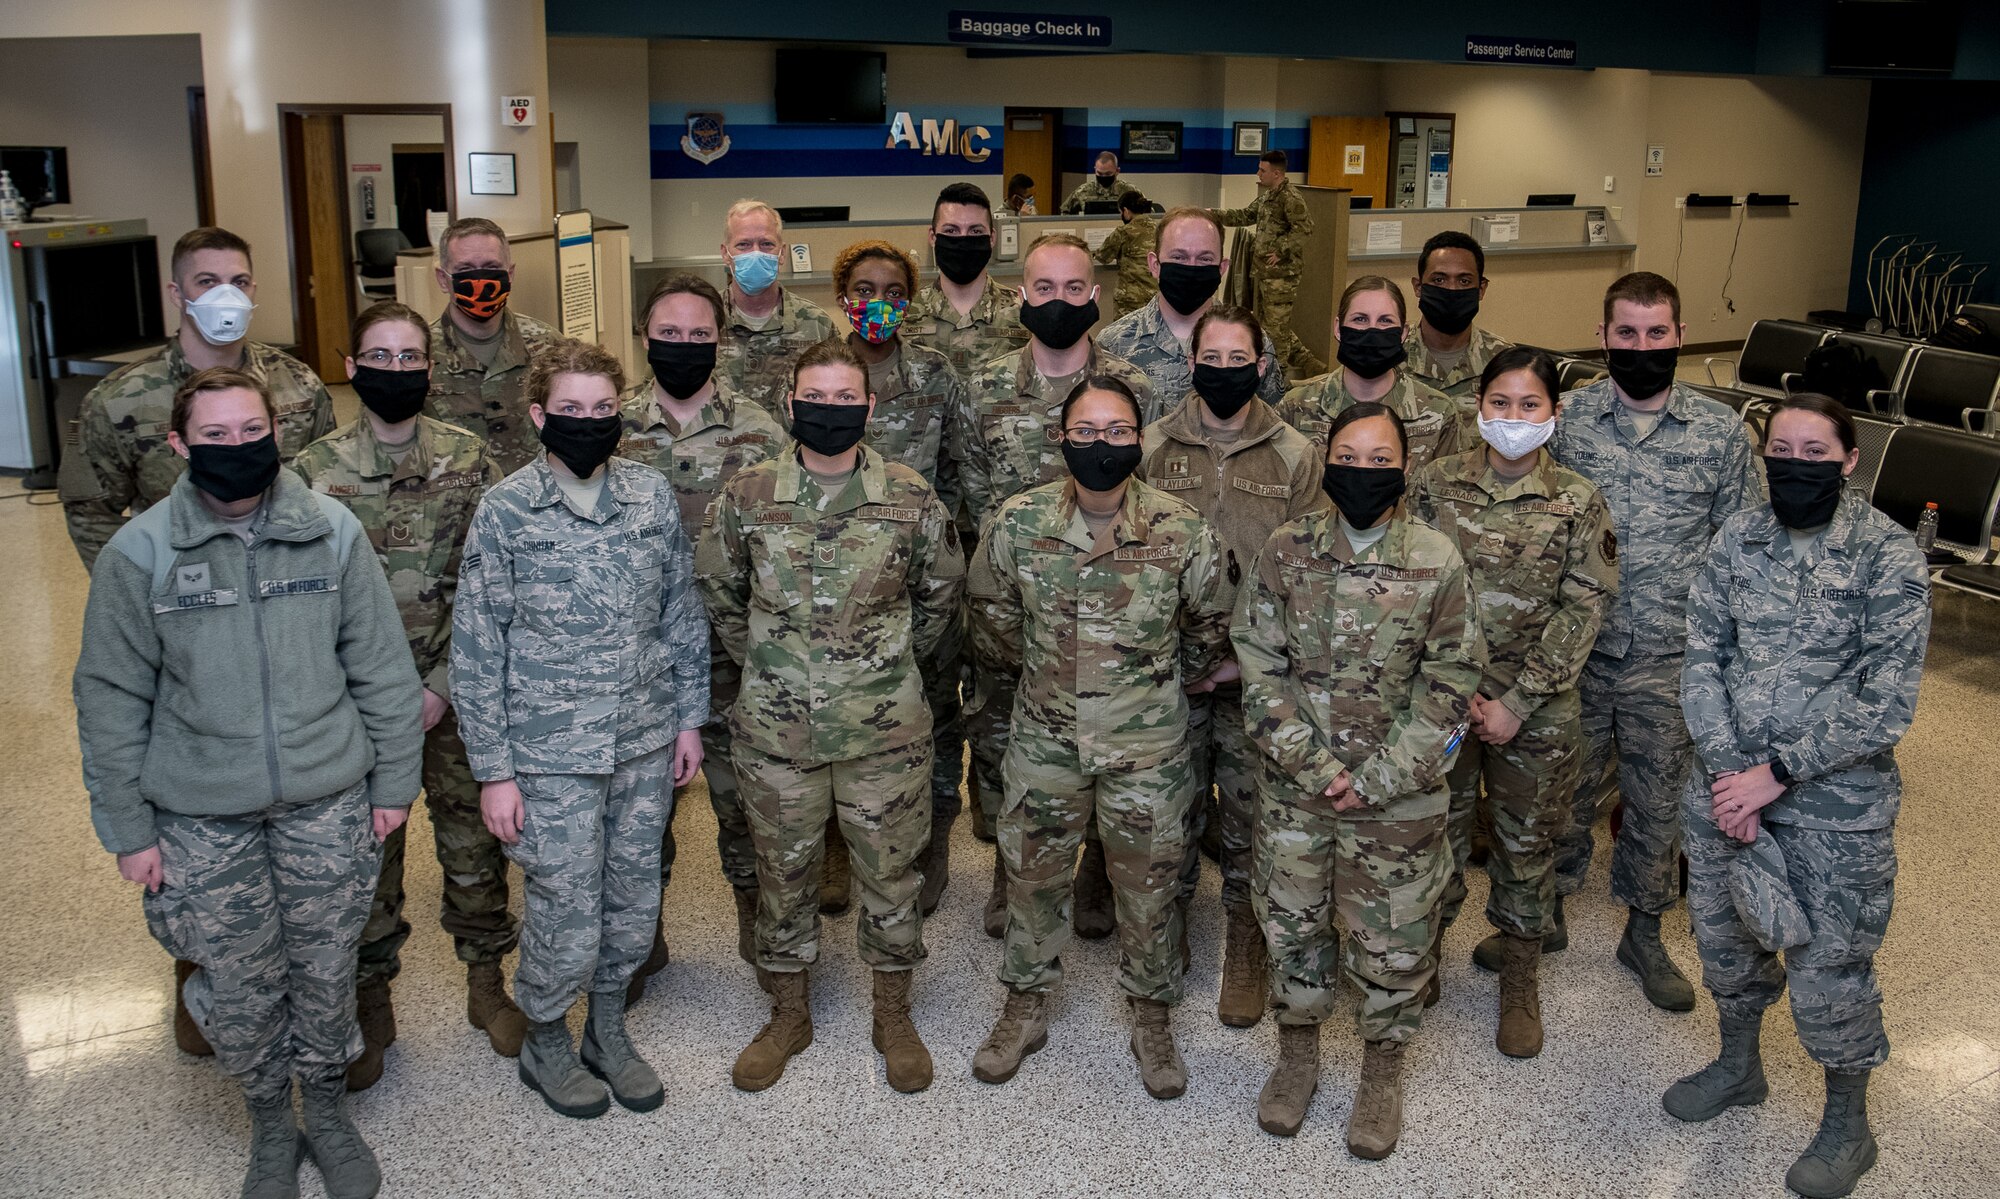 Medical personnel from the 932nd Airlift Wing deploy in support of the COVID-19 relief efforts in New York, April 22, 2020, Scott Air Force Base, Illinois . These members are nurses, medical technicians and radiologists, who volunteered to reply with less than a two day notice.  (Air Force photo by Christopher Parr)